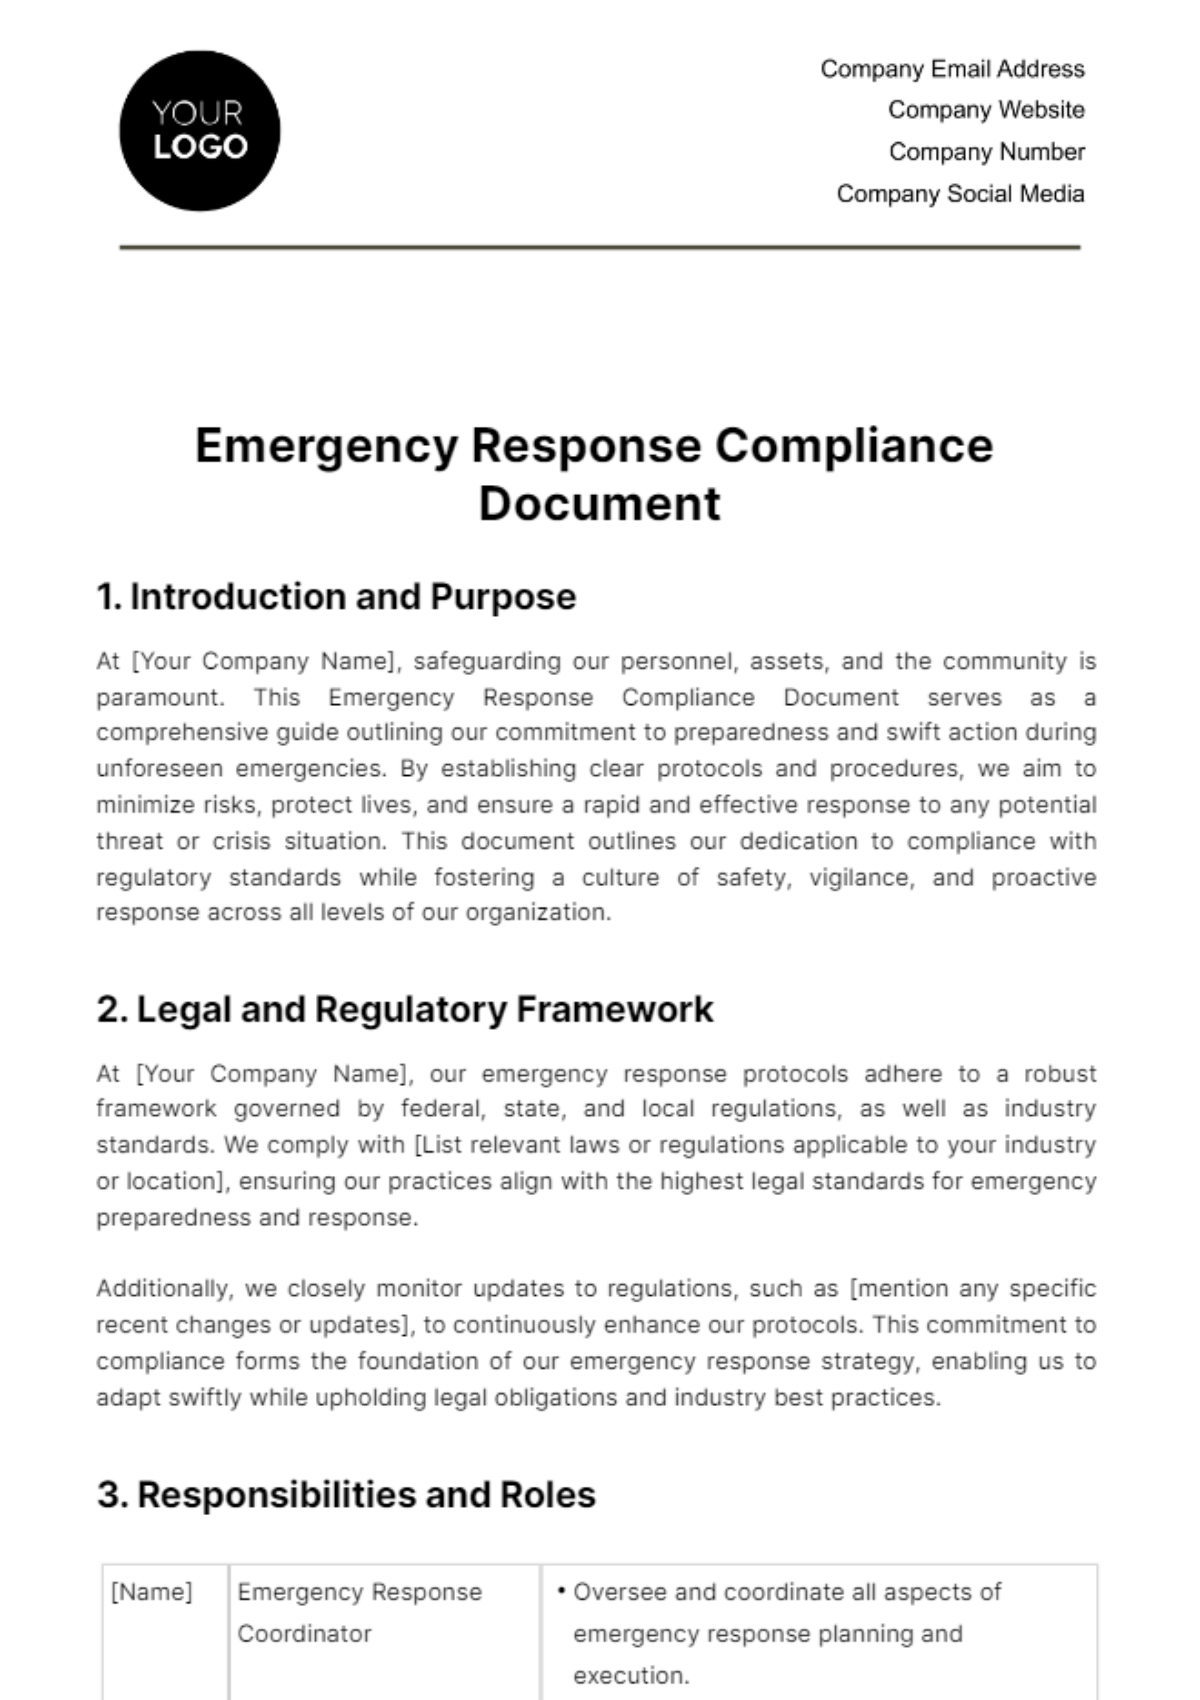 Free Emergency Response Compliance Document Template